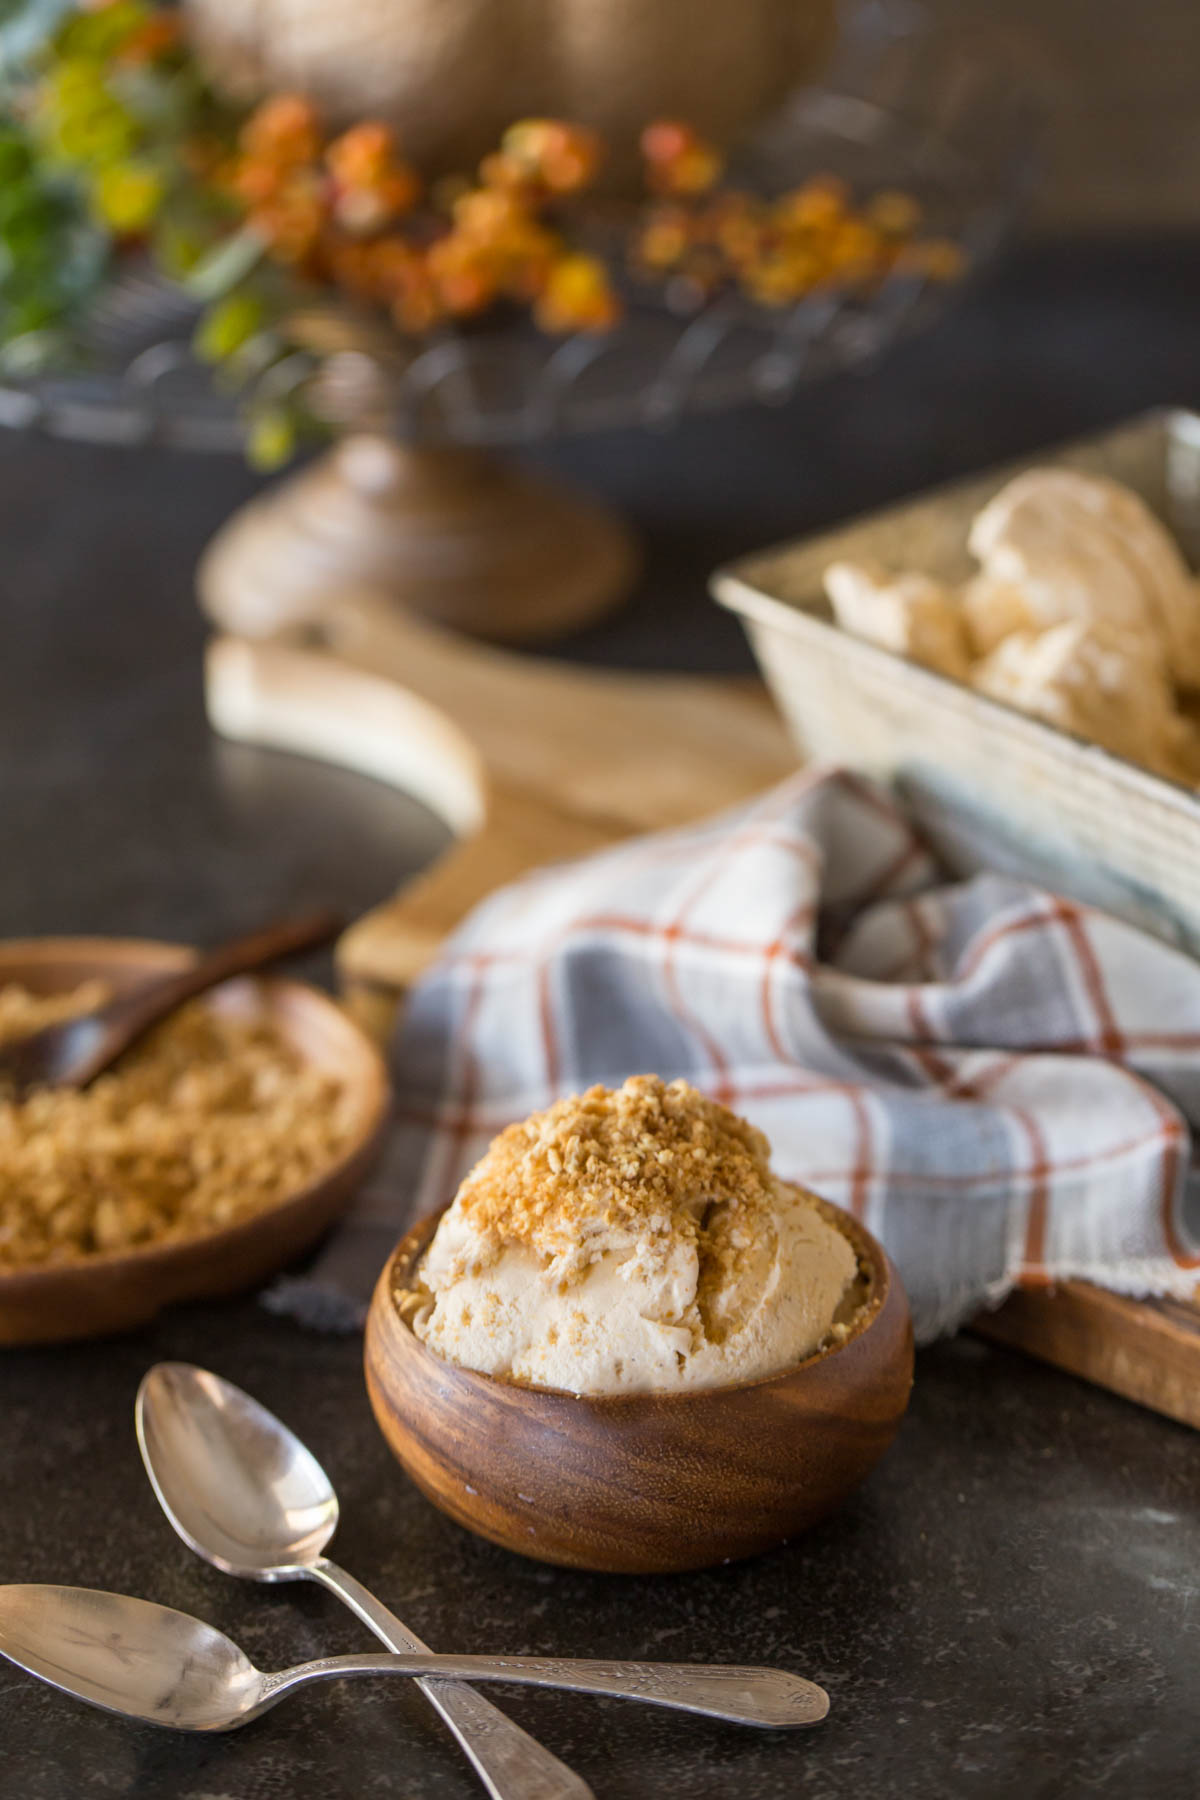 A wood bowl of Homemade Pumpkin Pie Ice Cream topped with crushed graham cracker crumbs, with two spoons sitting next to it, and a wood plate of crushed graham cracker crumbs in the background, along with the loaf pan container of Homemade Pumpkin Pie Ice Cream. 